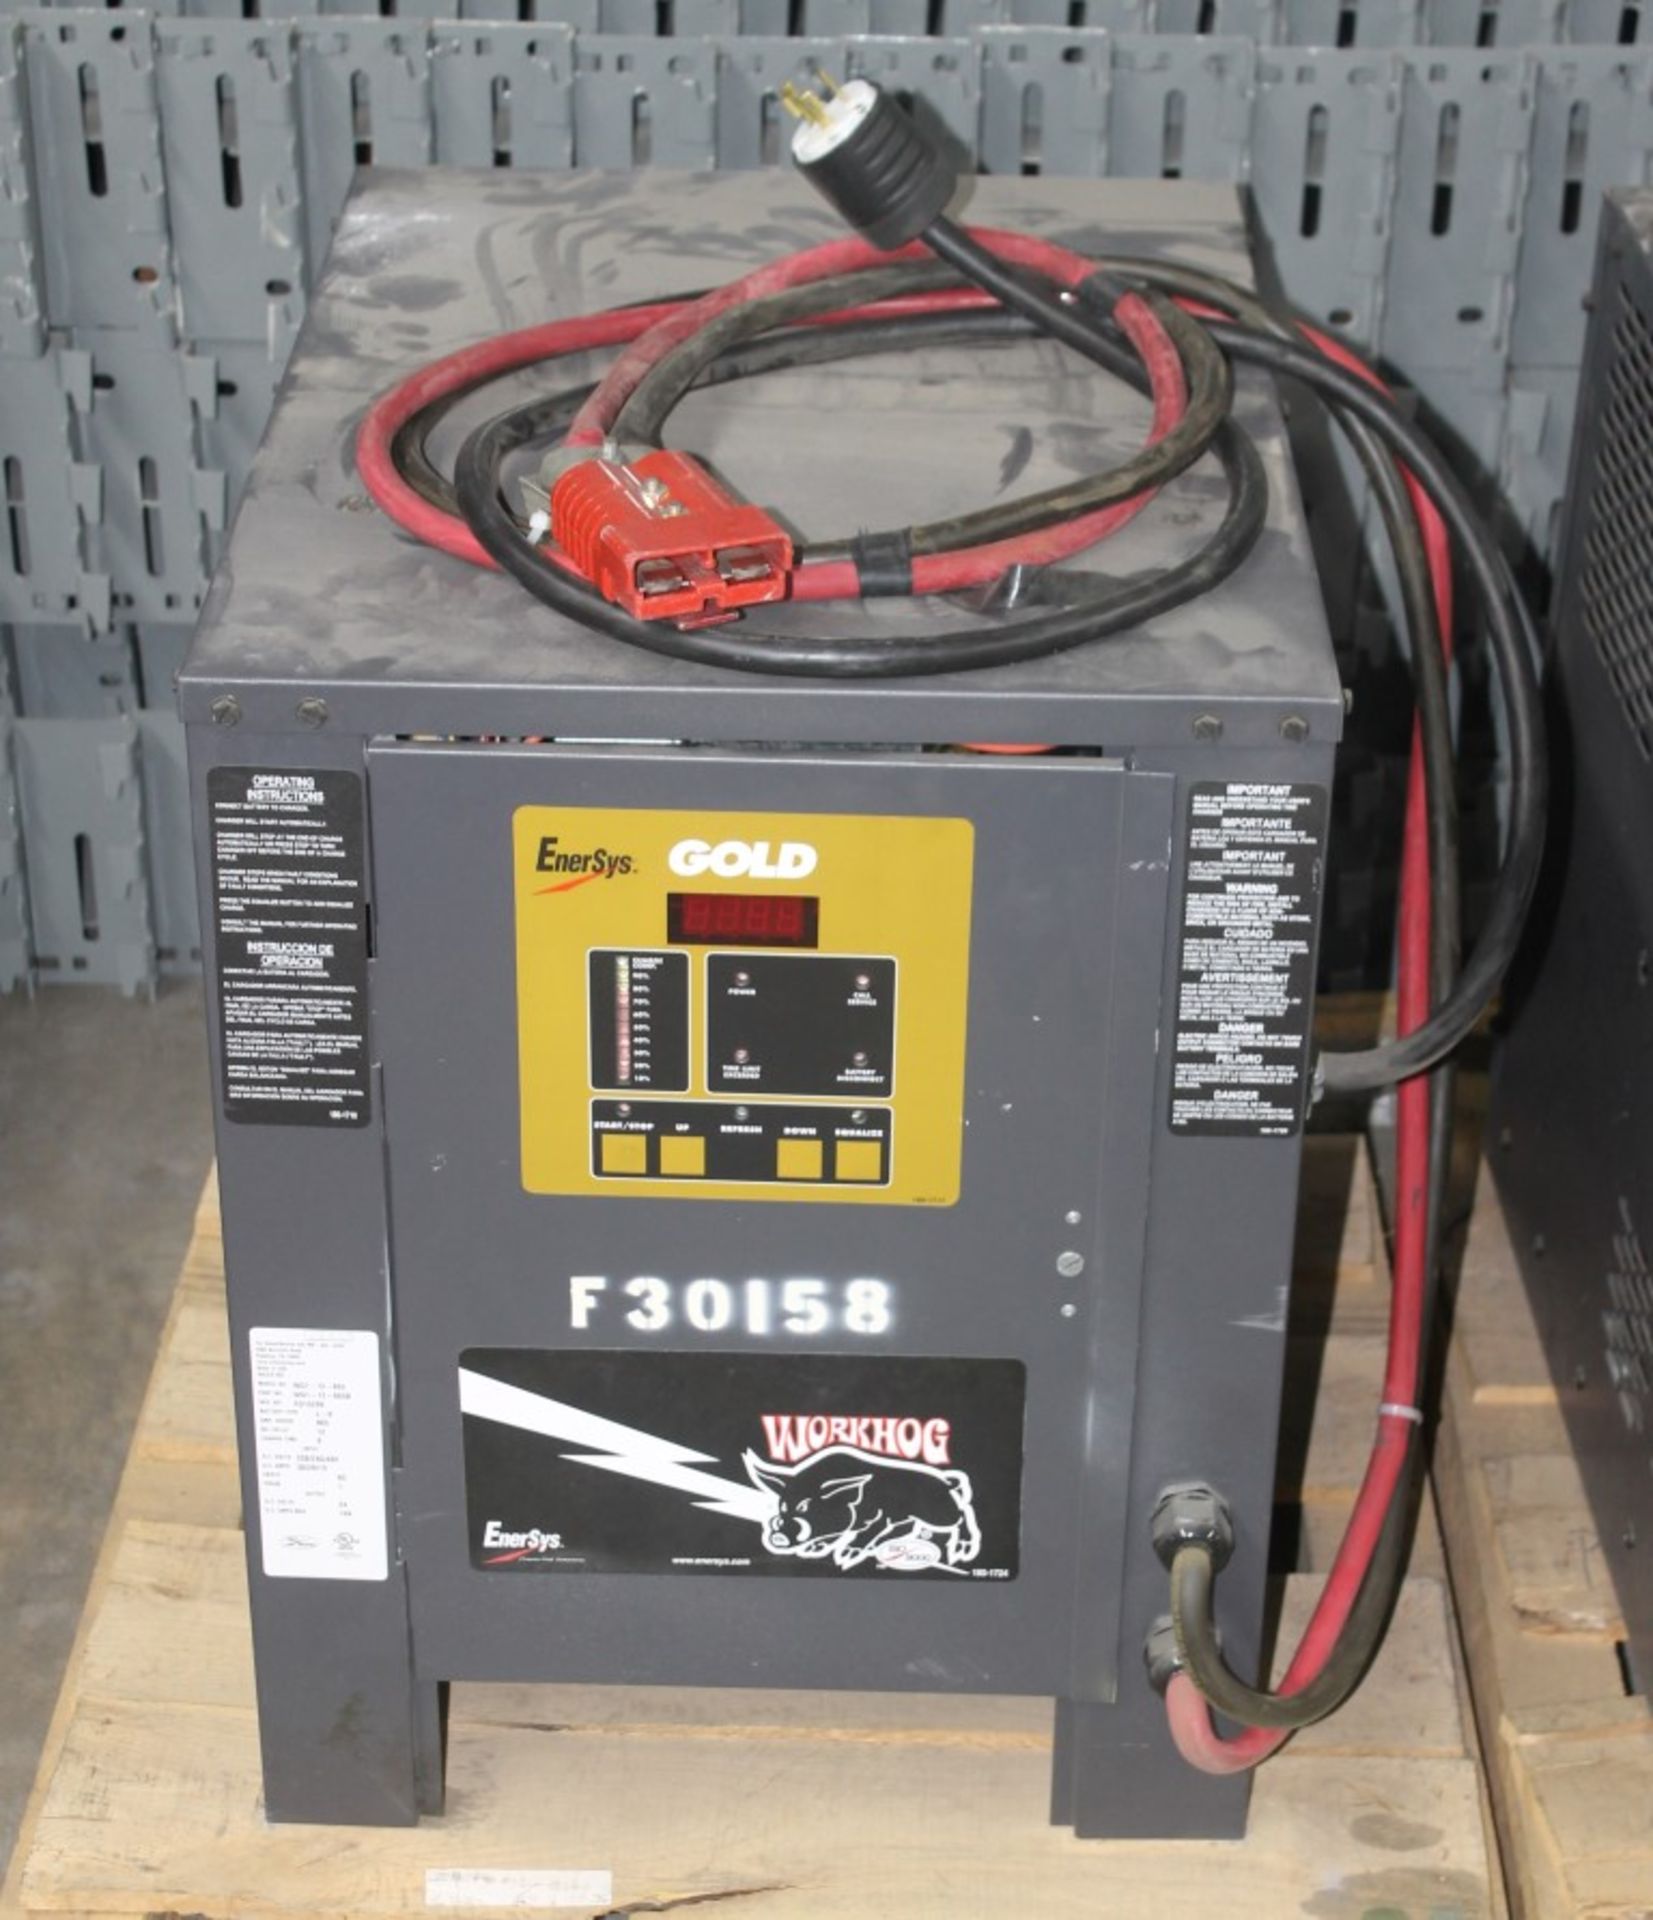 ENERSYS GOLD 24 VOLTS BATTERY CHARGER,